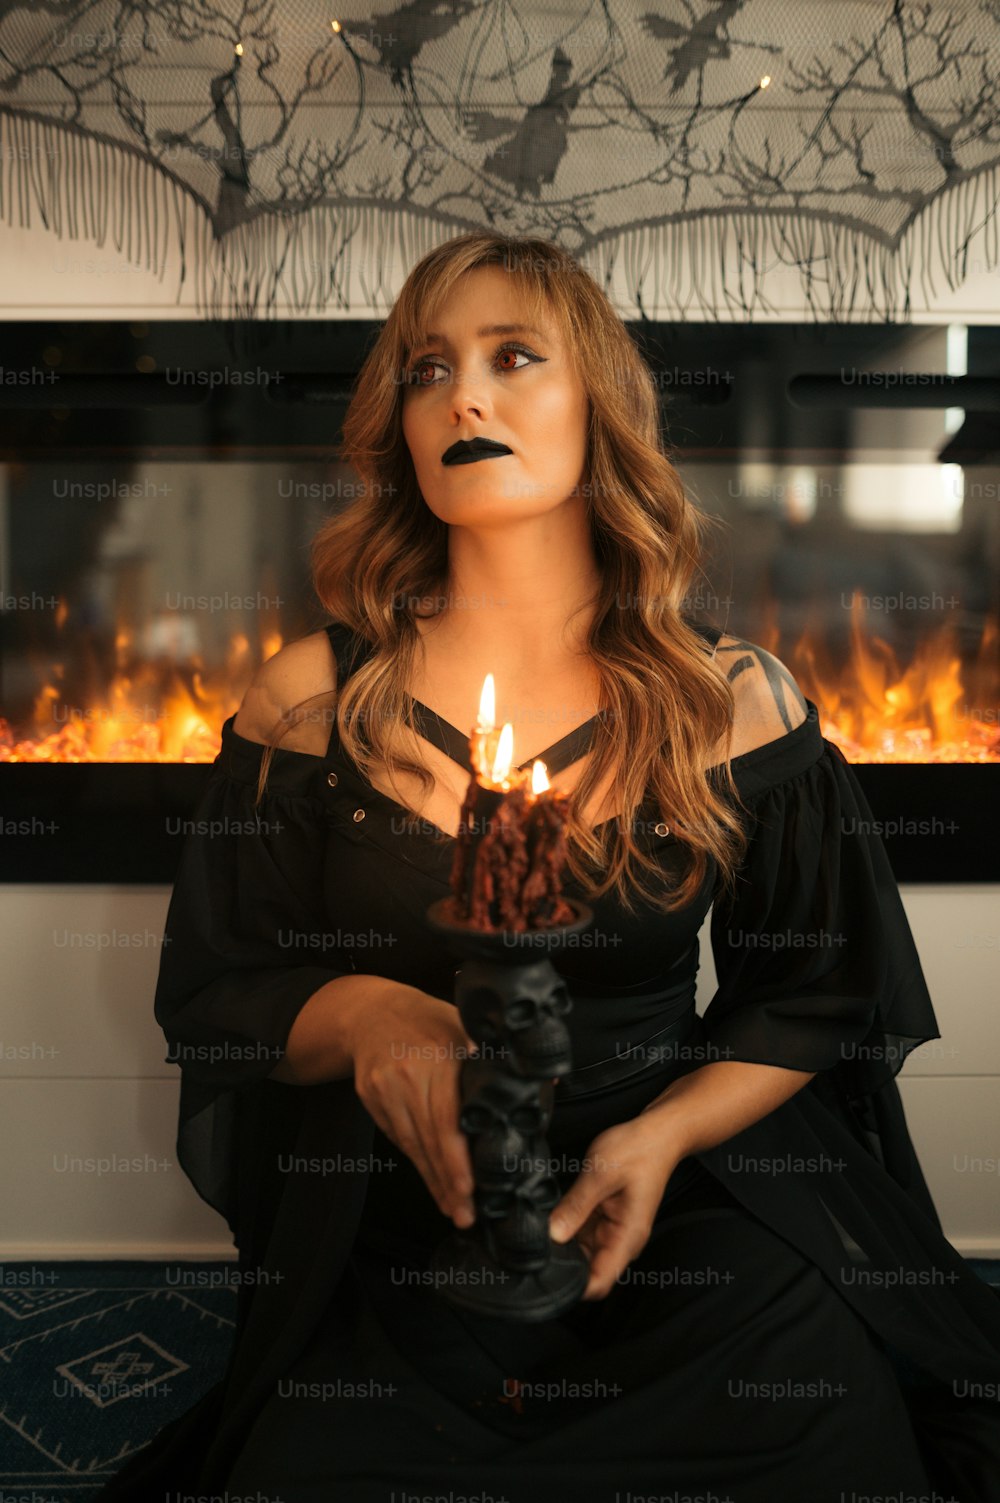 a woman in a black dress holding a lit candle